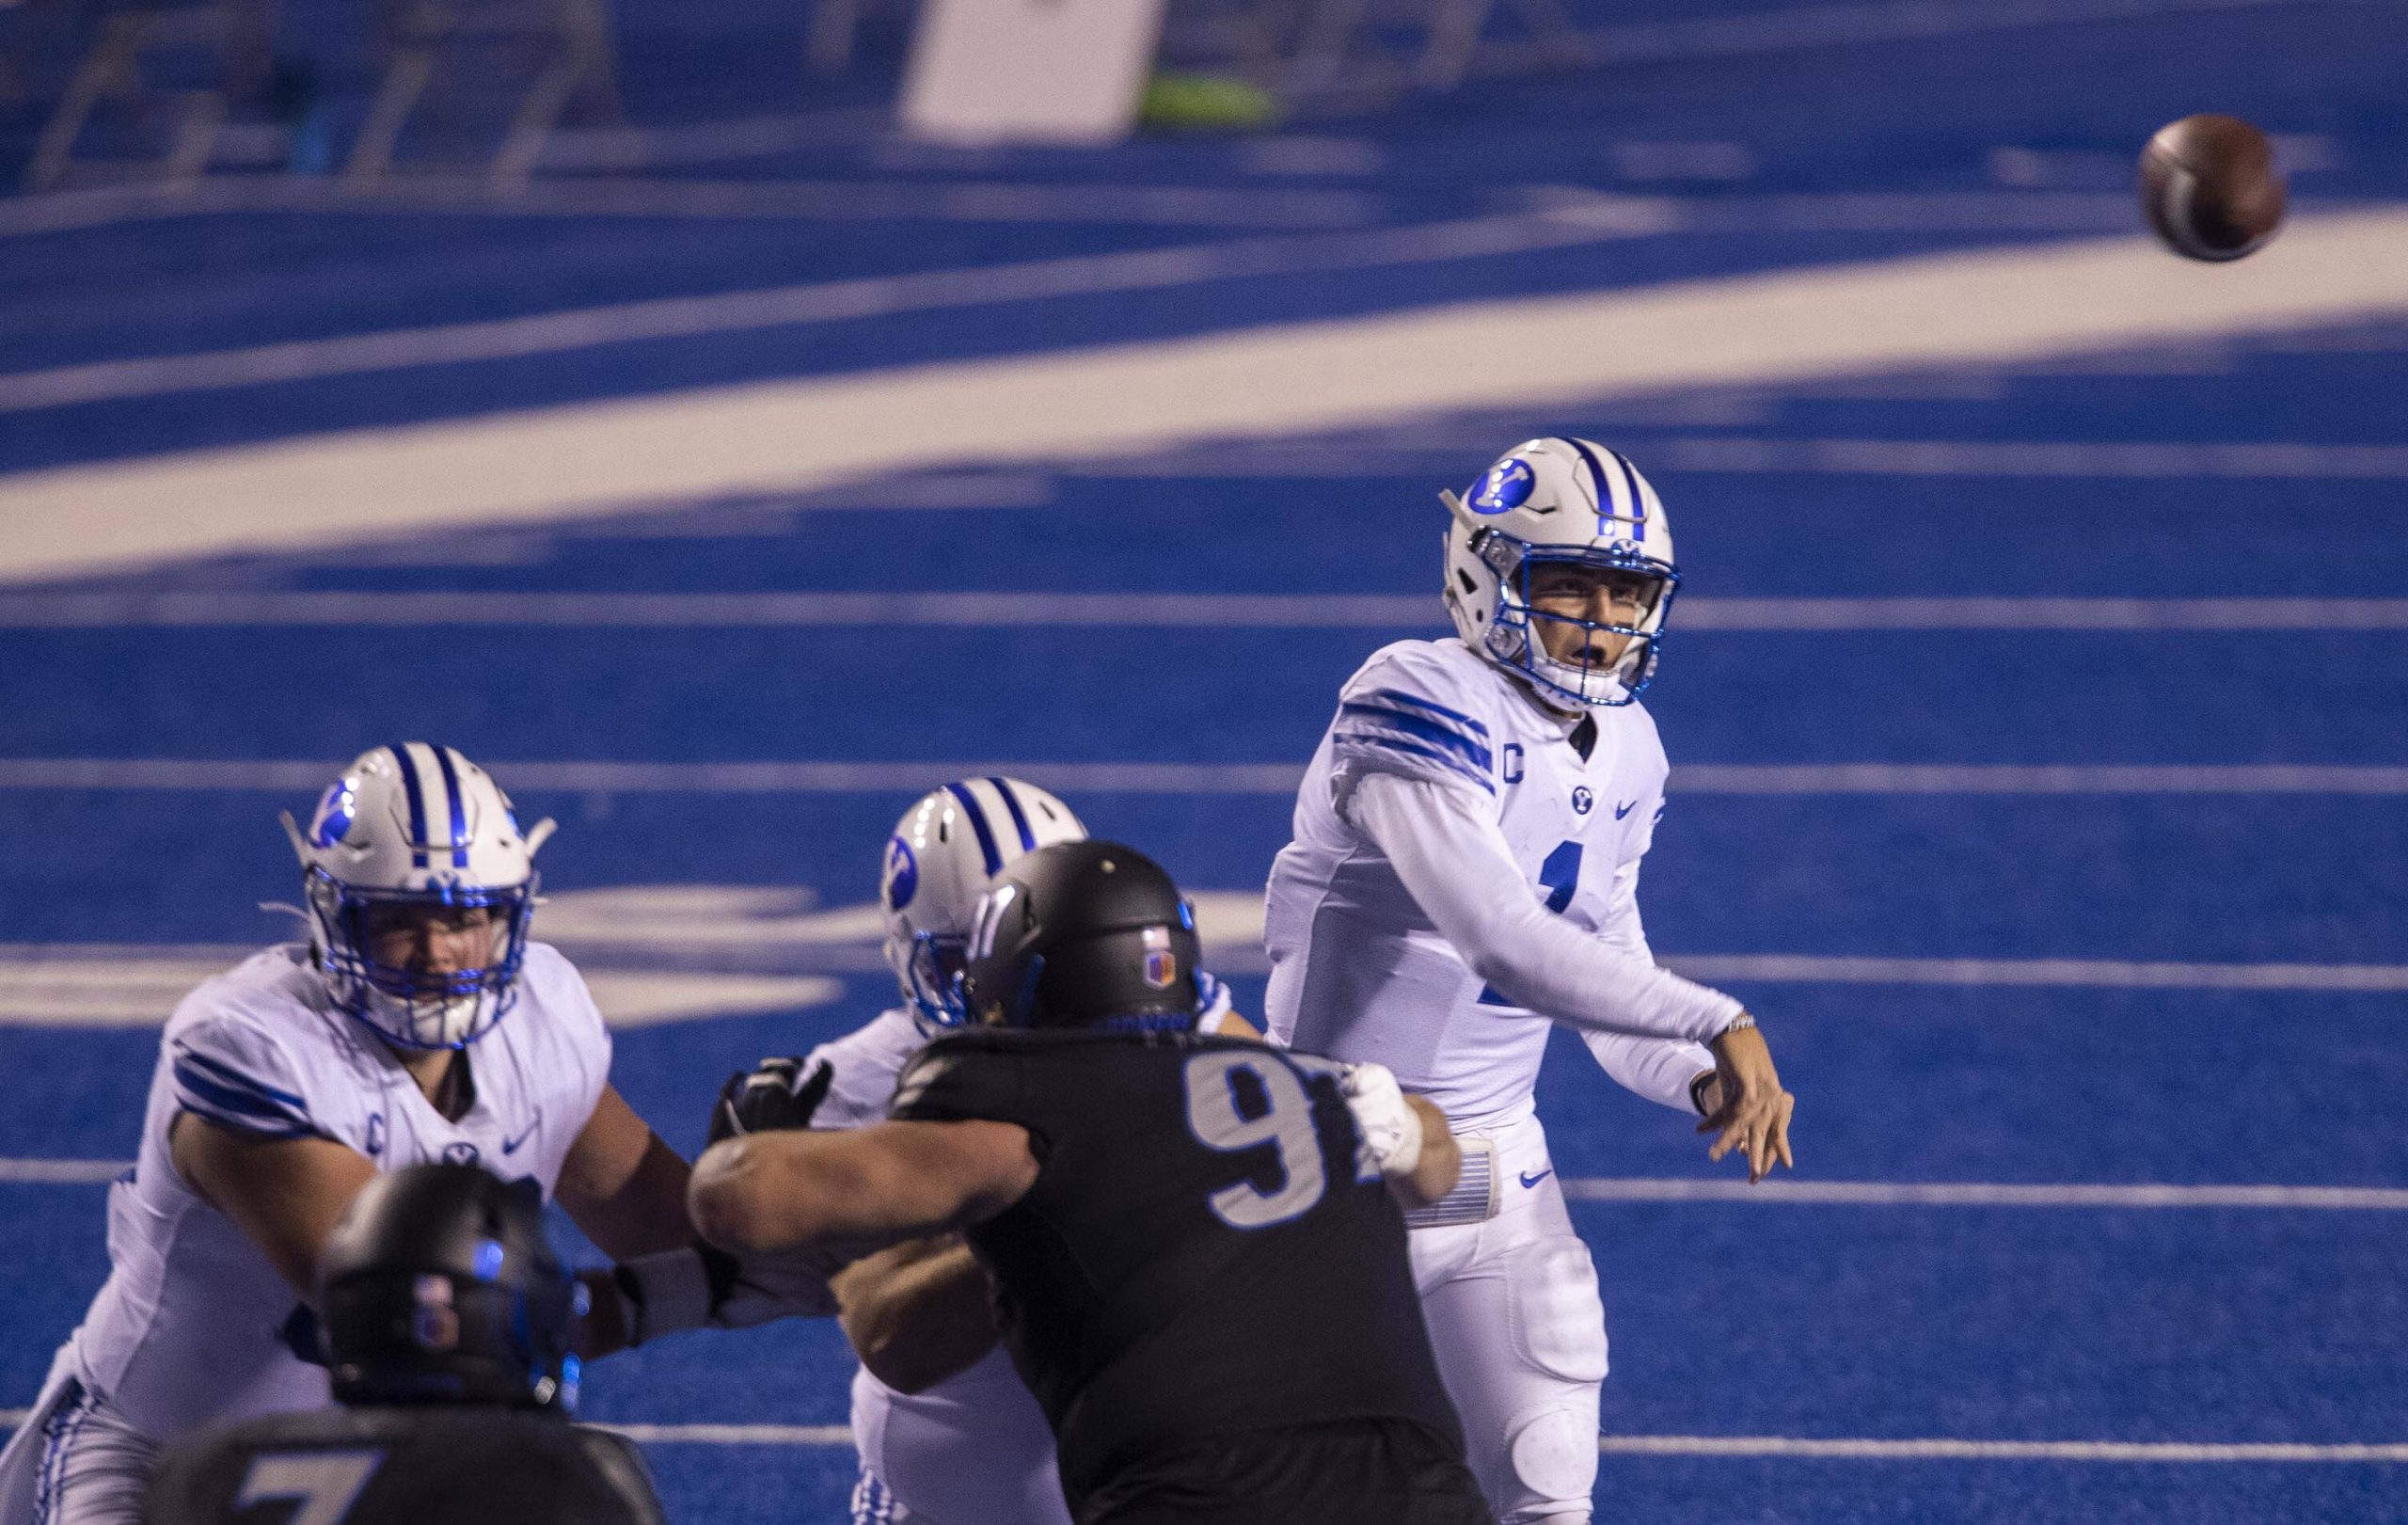 November 6, 2020, Boise, ID, USA: BYU quarterback Zach Wilson, right, has plenty of time to pass with his offensive line